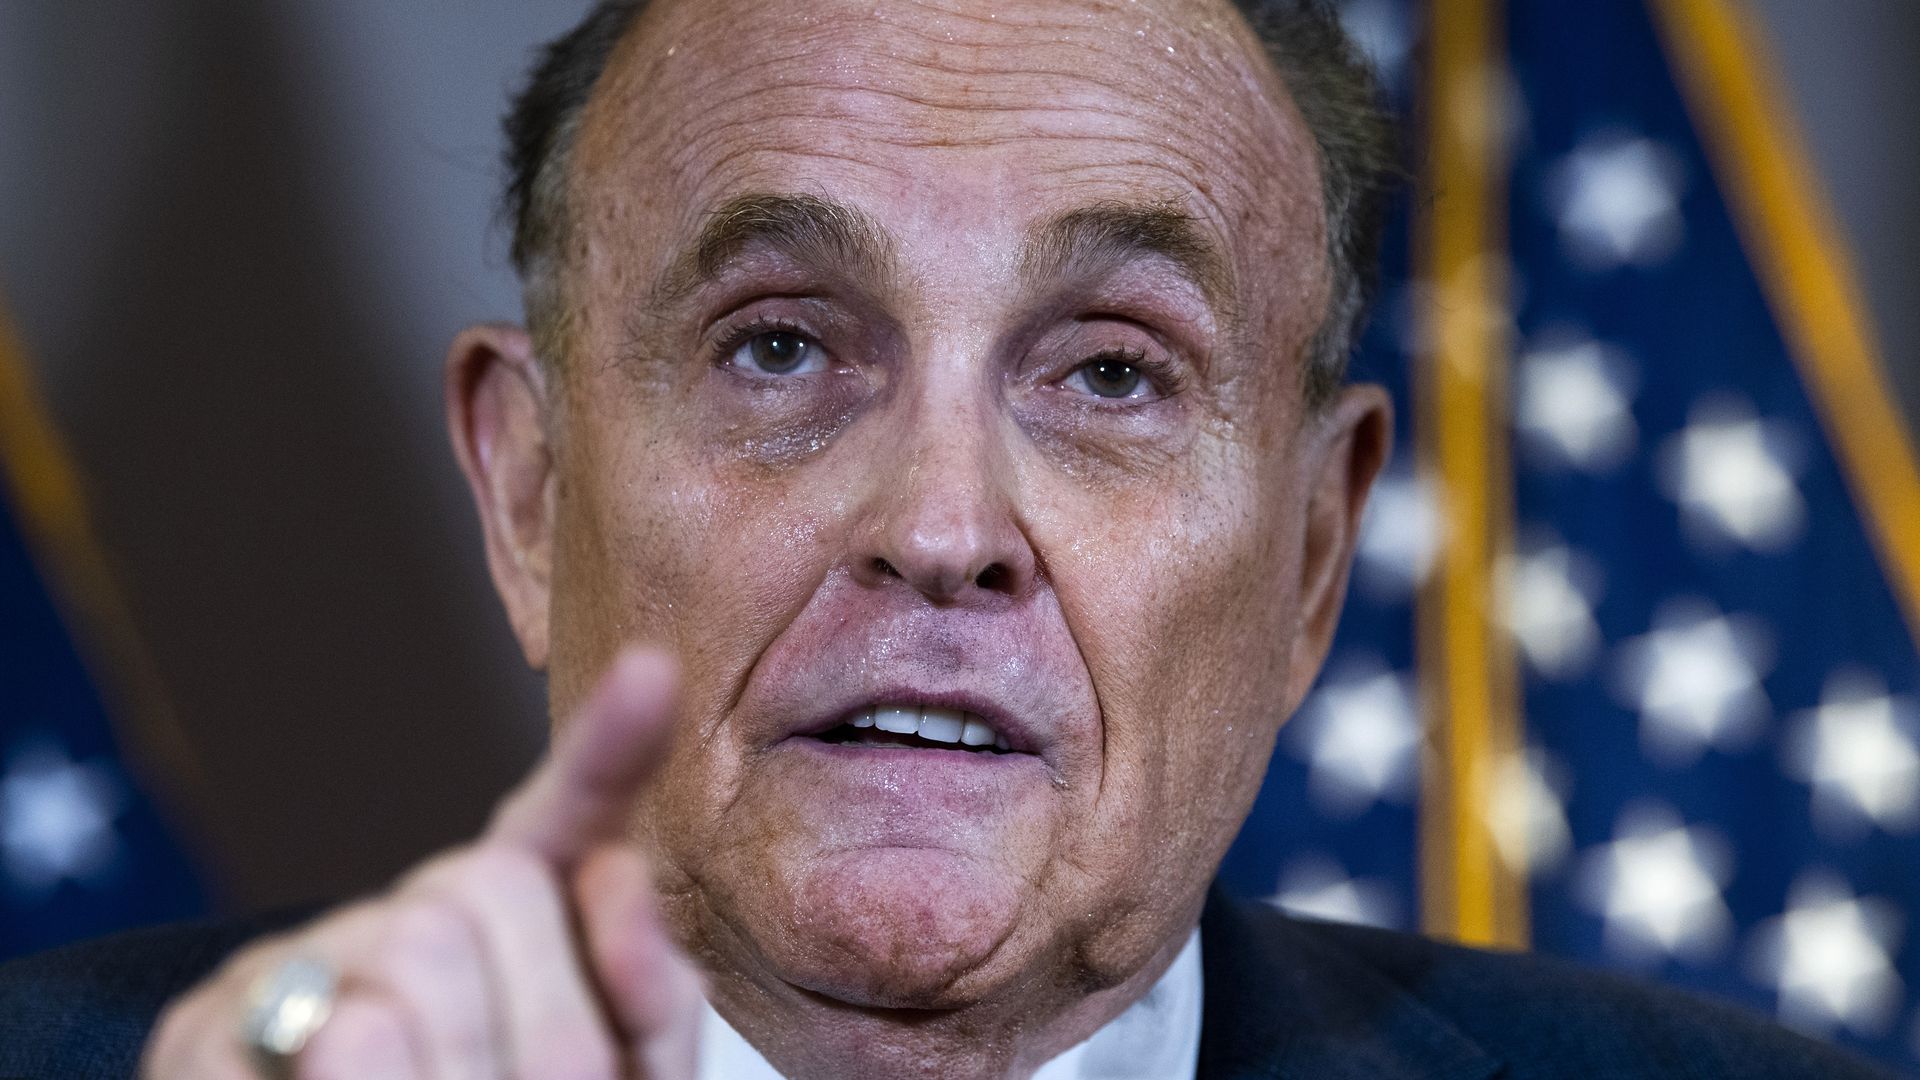  Rudolph Giuliani speaking during a press conference in Washington, D.C, in November 2020.